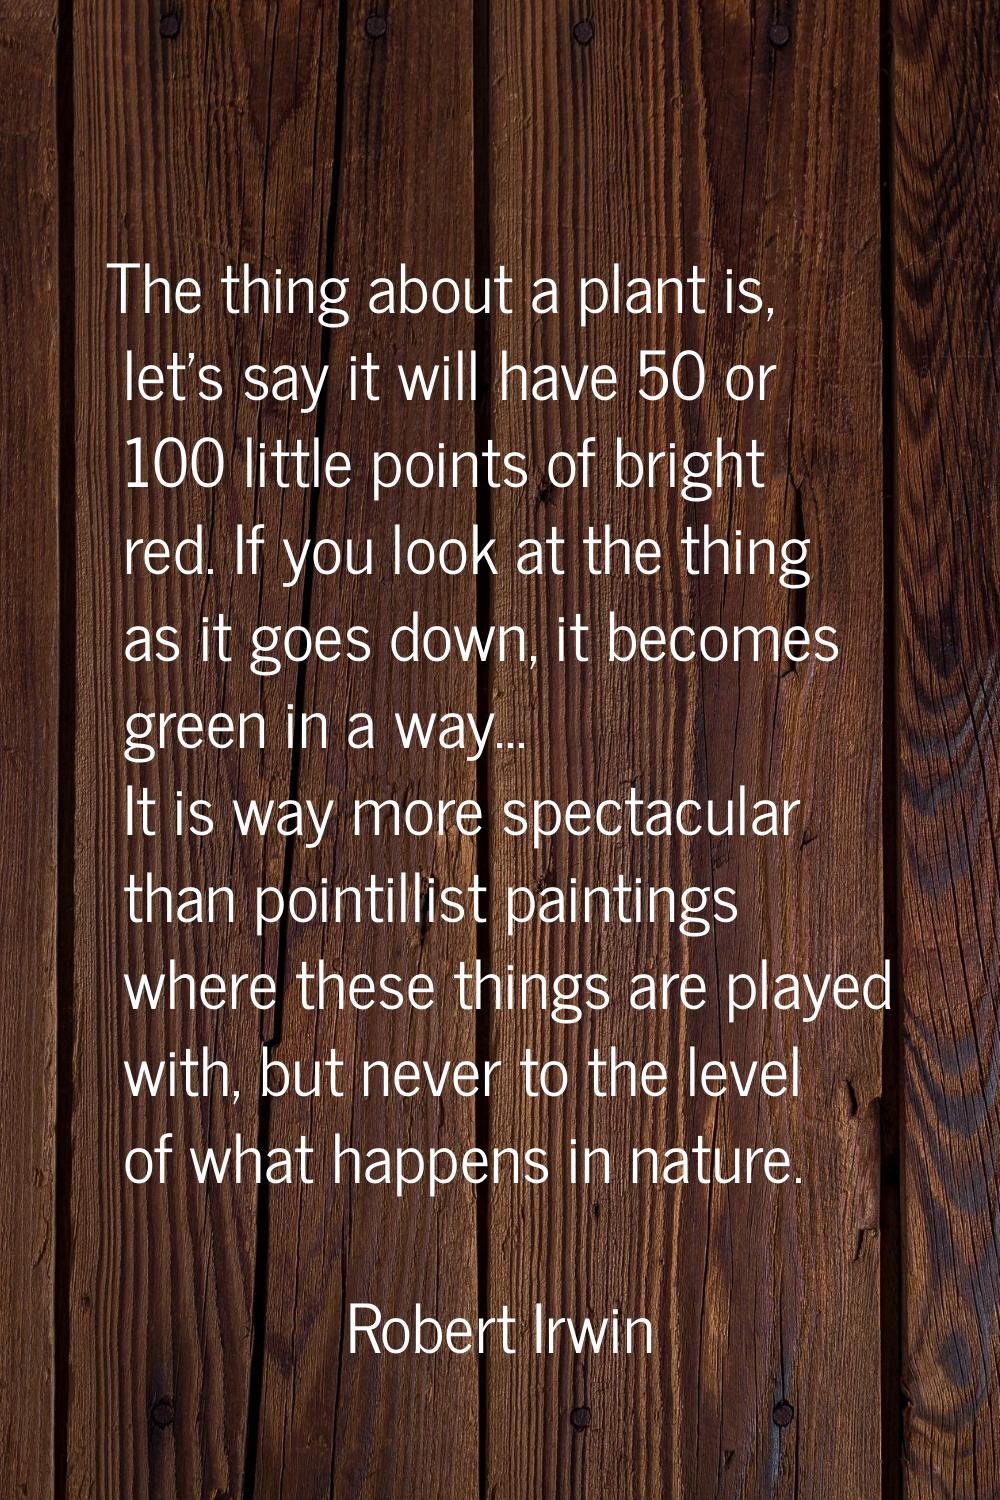 The thing about a plant is, let's say it will have 50 or 100 little points of bright red. If you lo